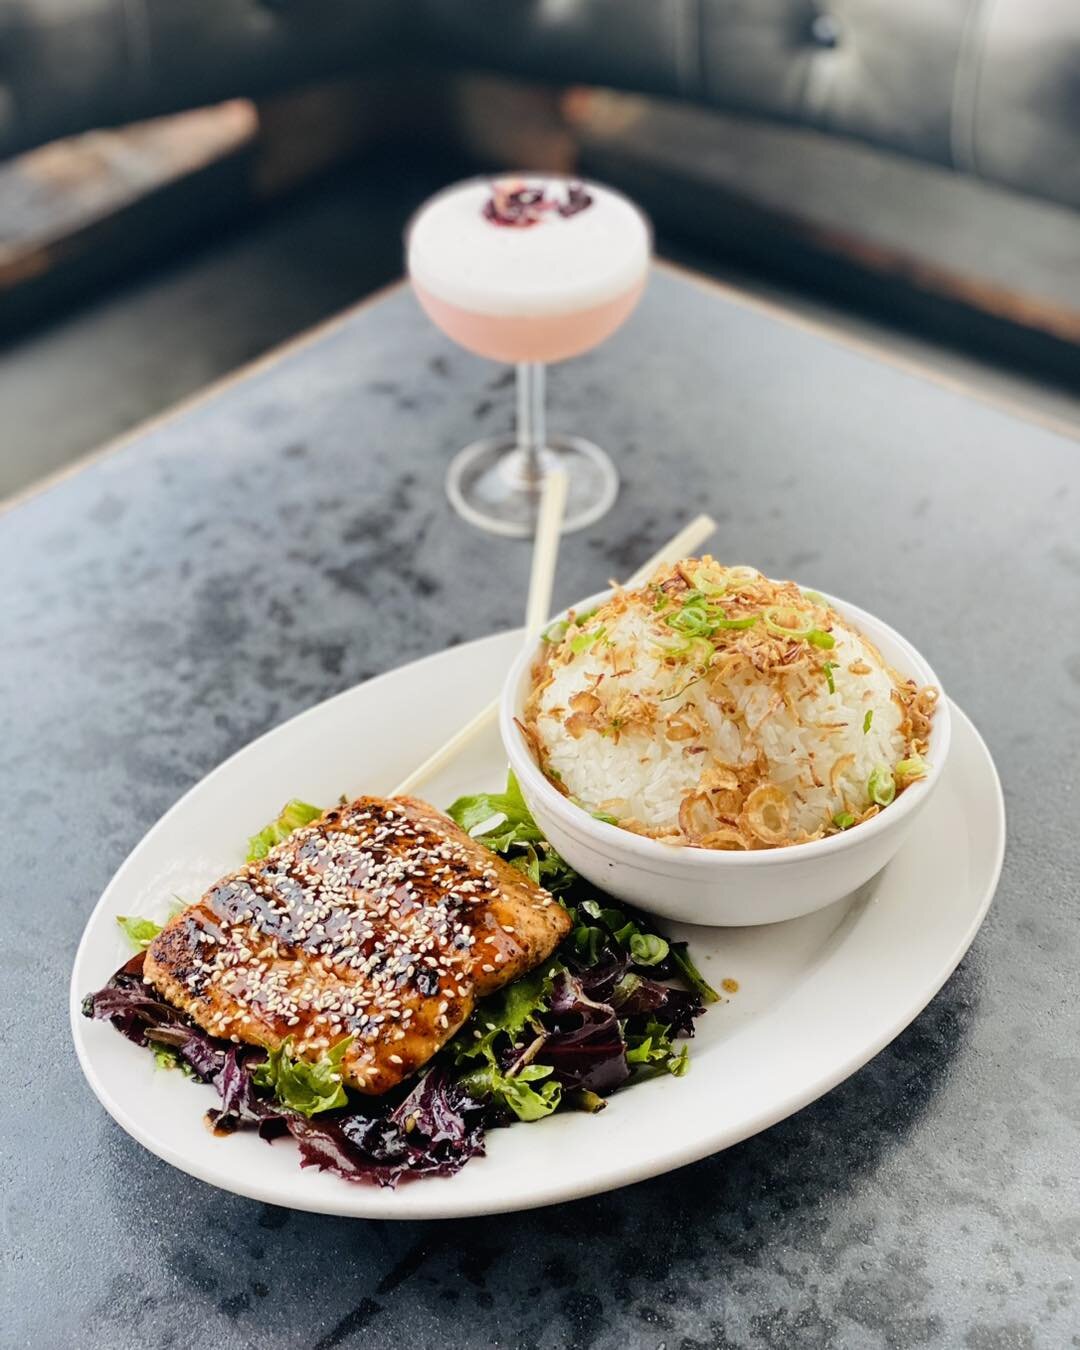 🏮April Features🏮

Teriyaki Salmon 
Served with a spring salad mix, a side of jasmine rice with scallions and fried shallots 🤌

Lavender Sour
Gin, lavender, aquafaba, lemon and lime 🫶